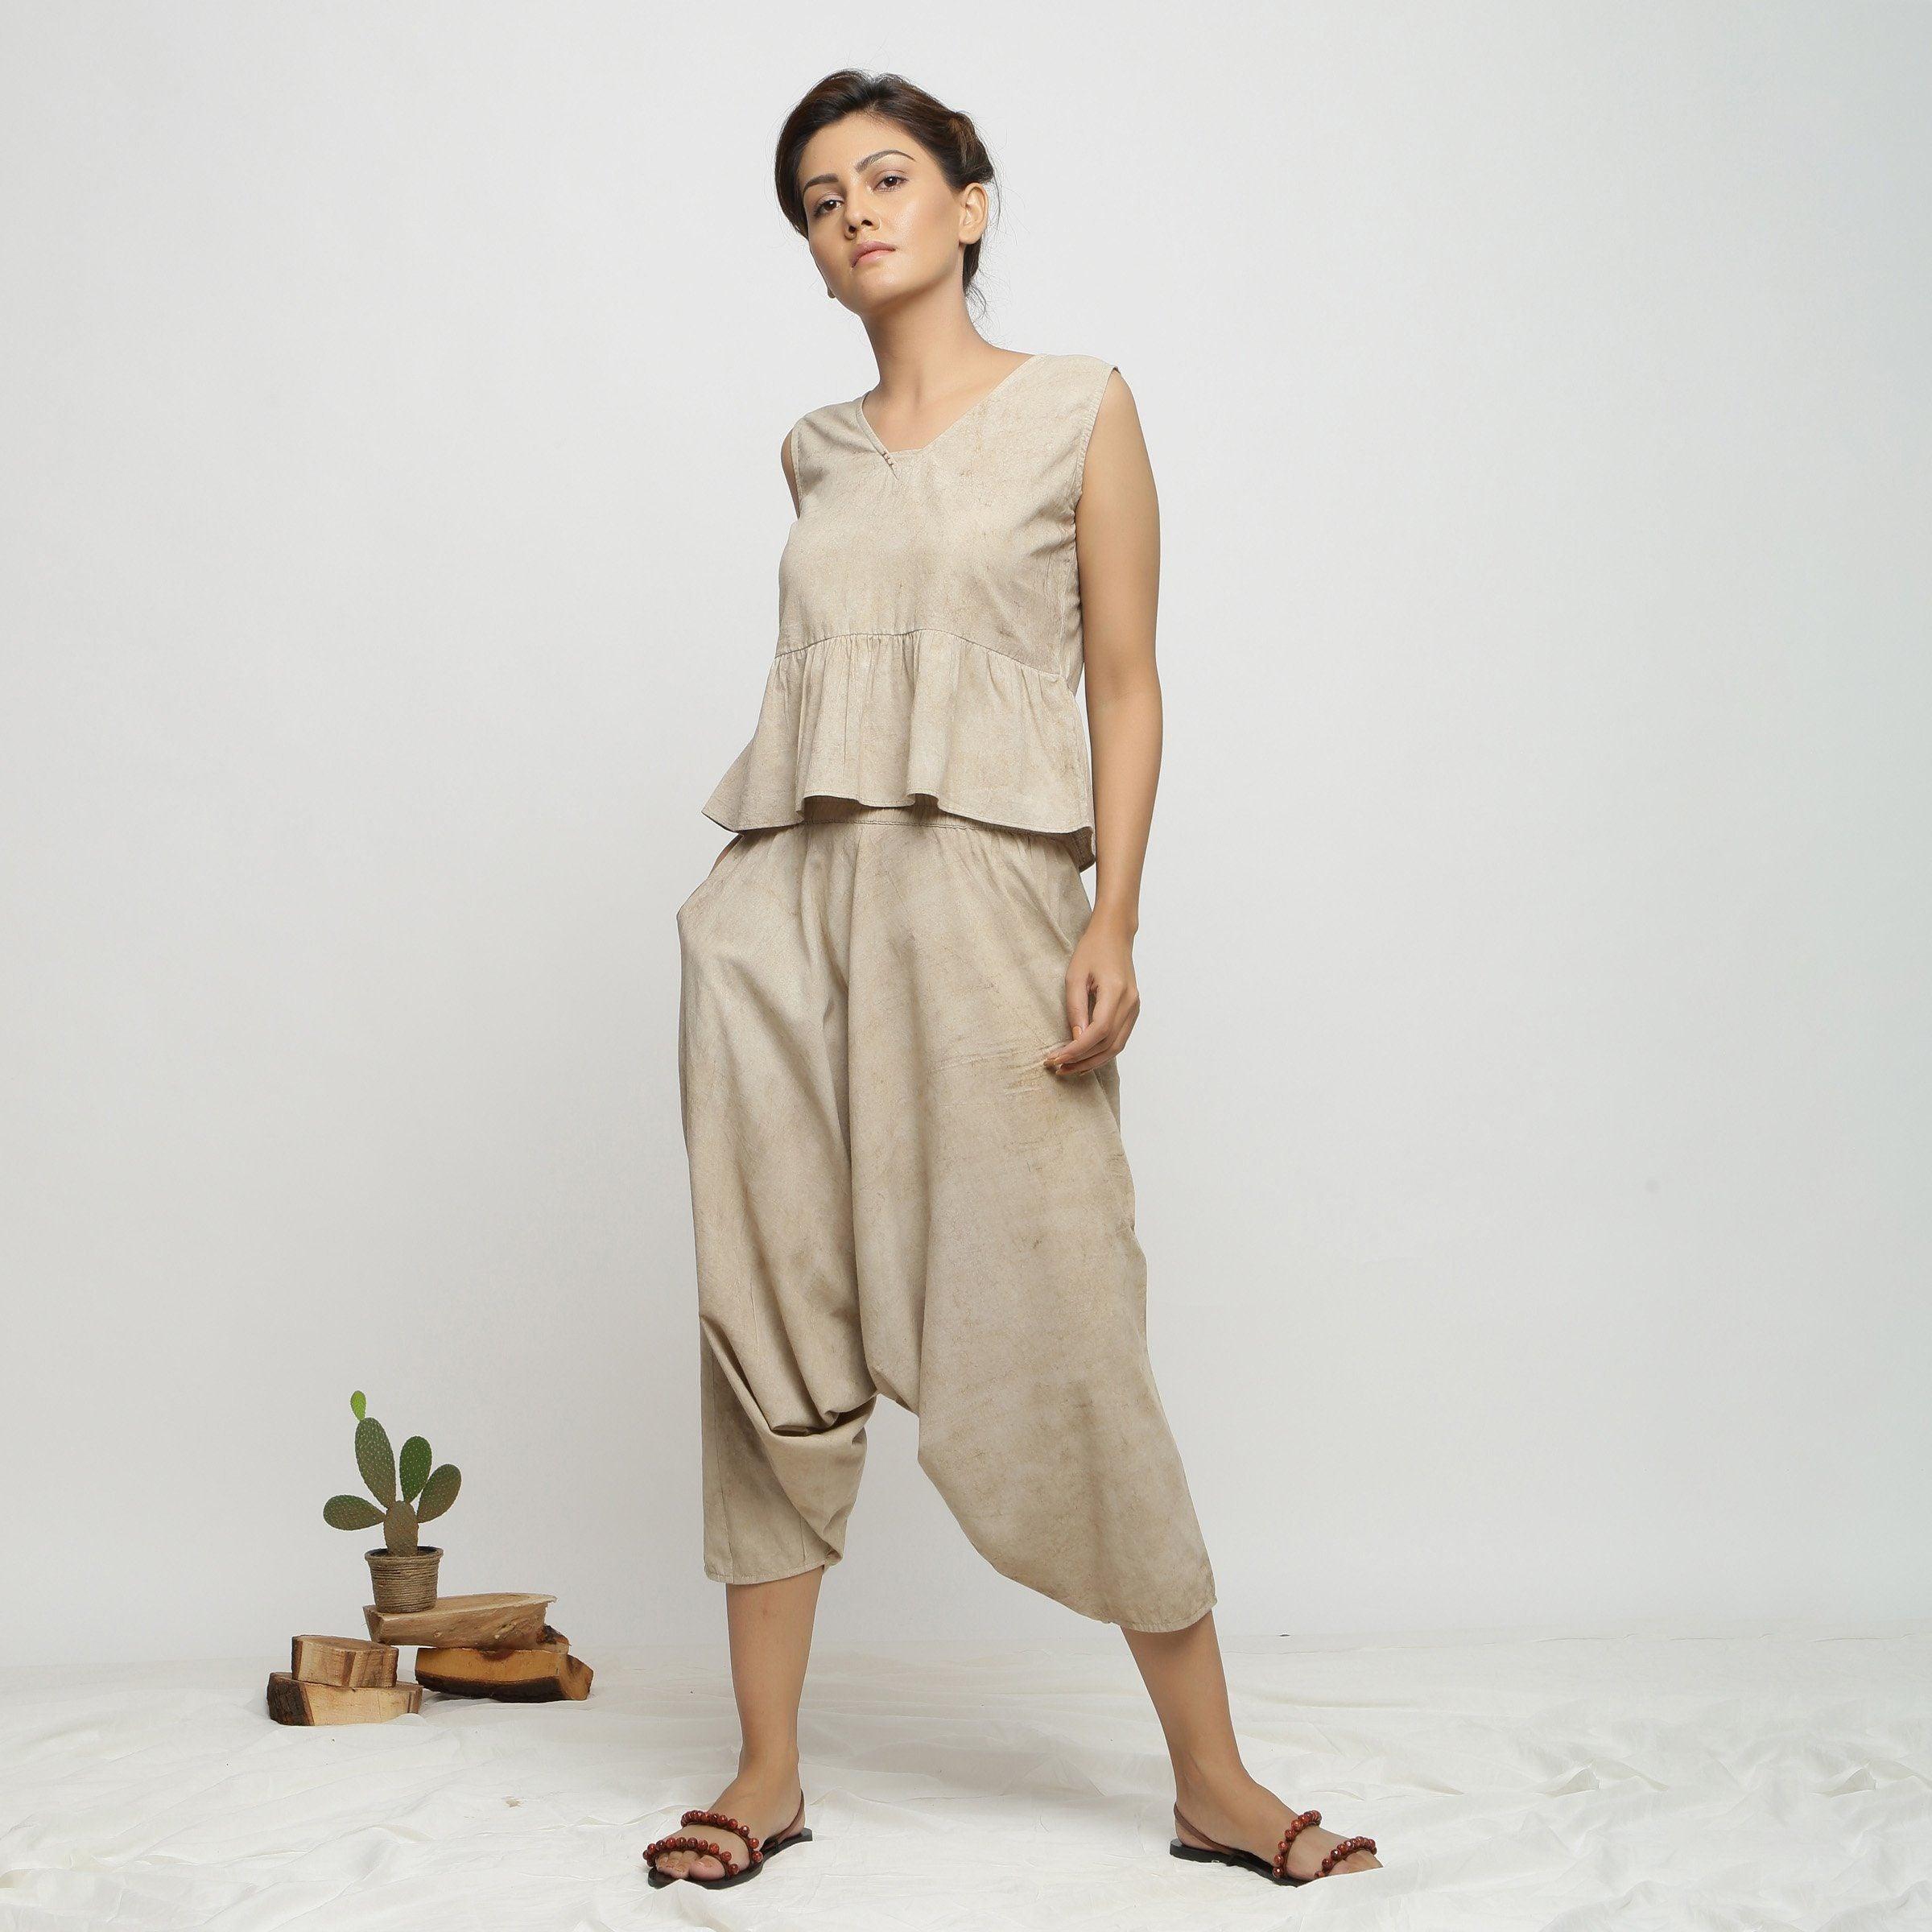 Women Business Casual Pants Petite Pocket Elastic Breathable Trousers Loose  Cotton and Linen Pant Womens (Beige, S) at  Women's Clothing store